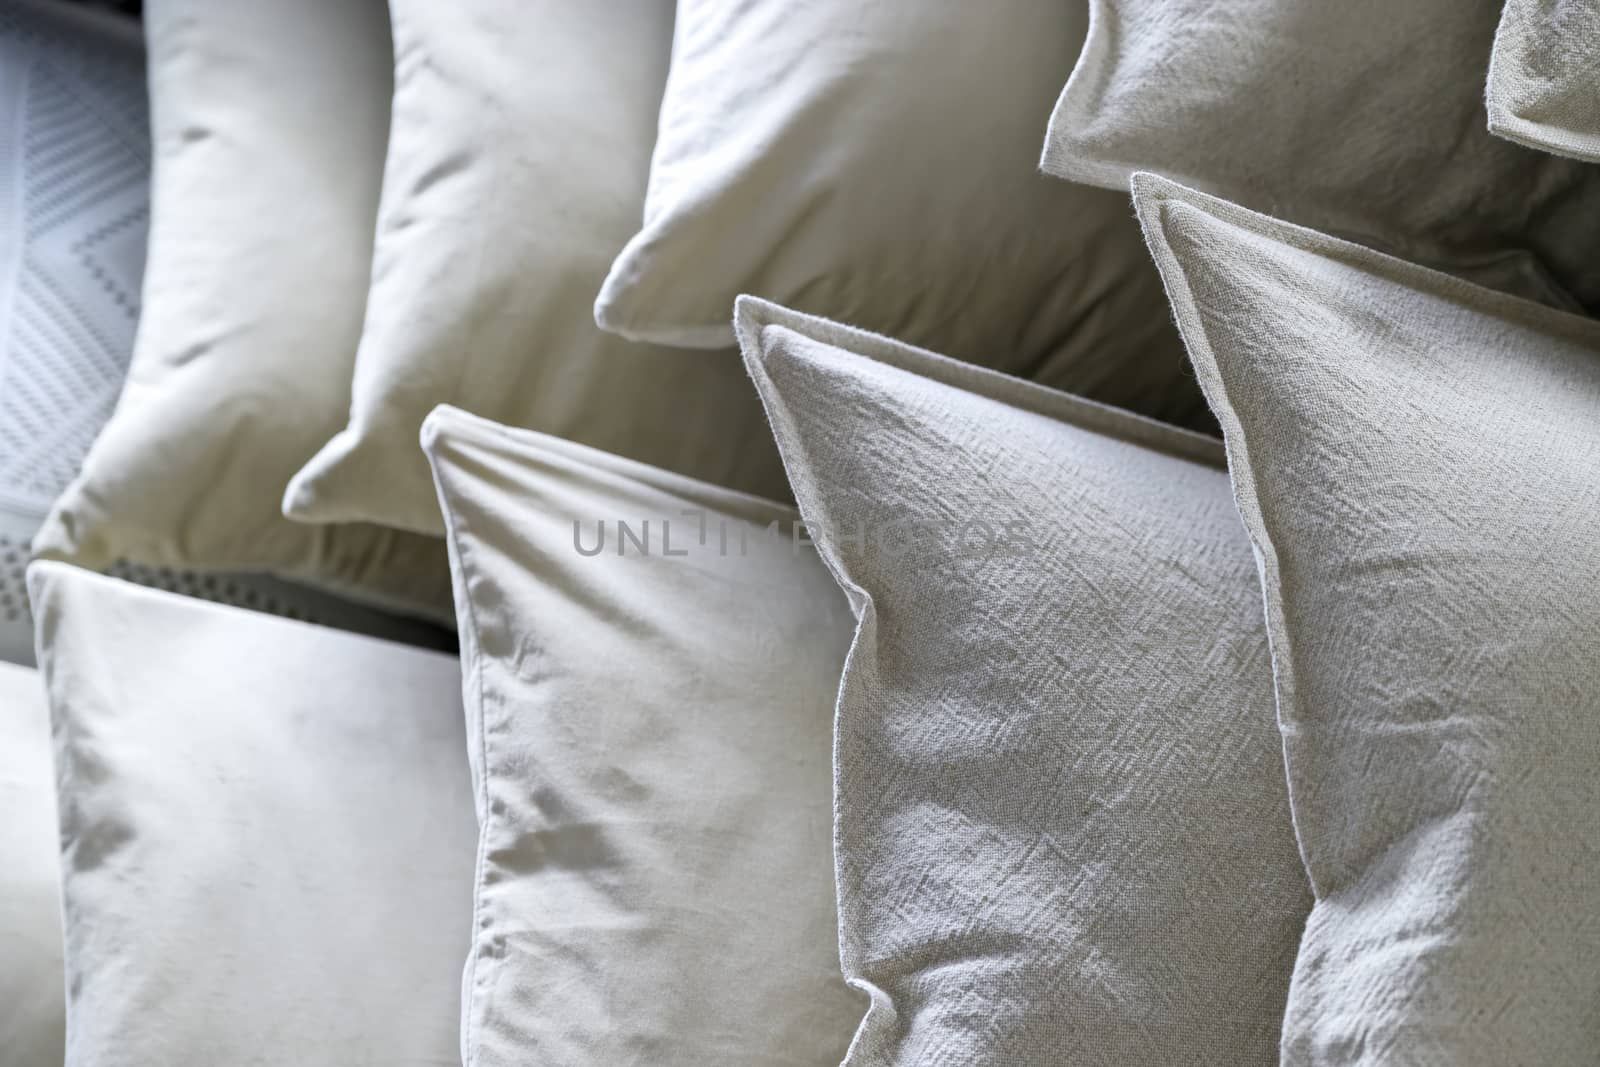 Lots of soft down white pillows convenient for a pleasant sleep.